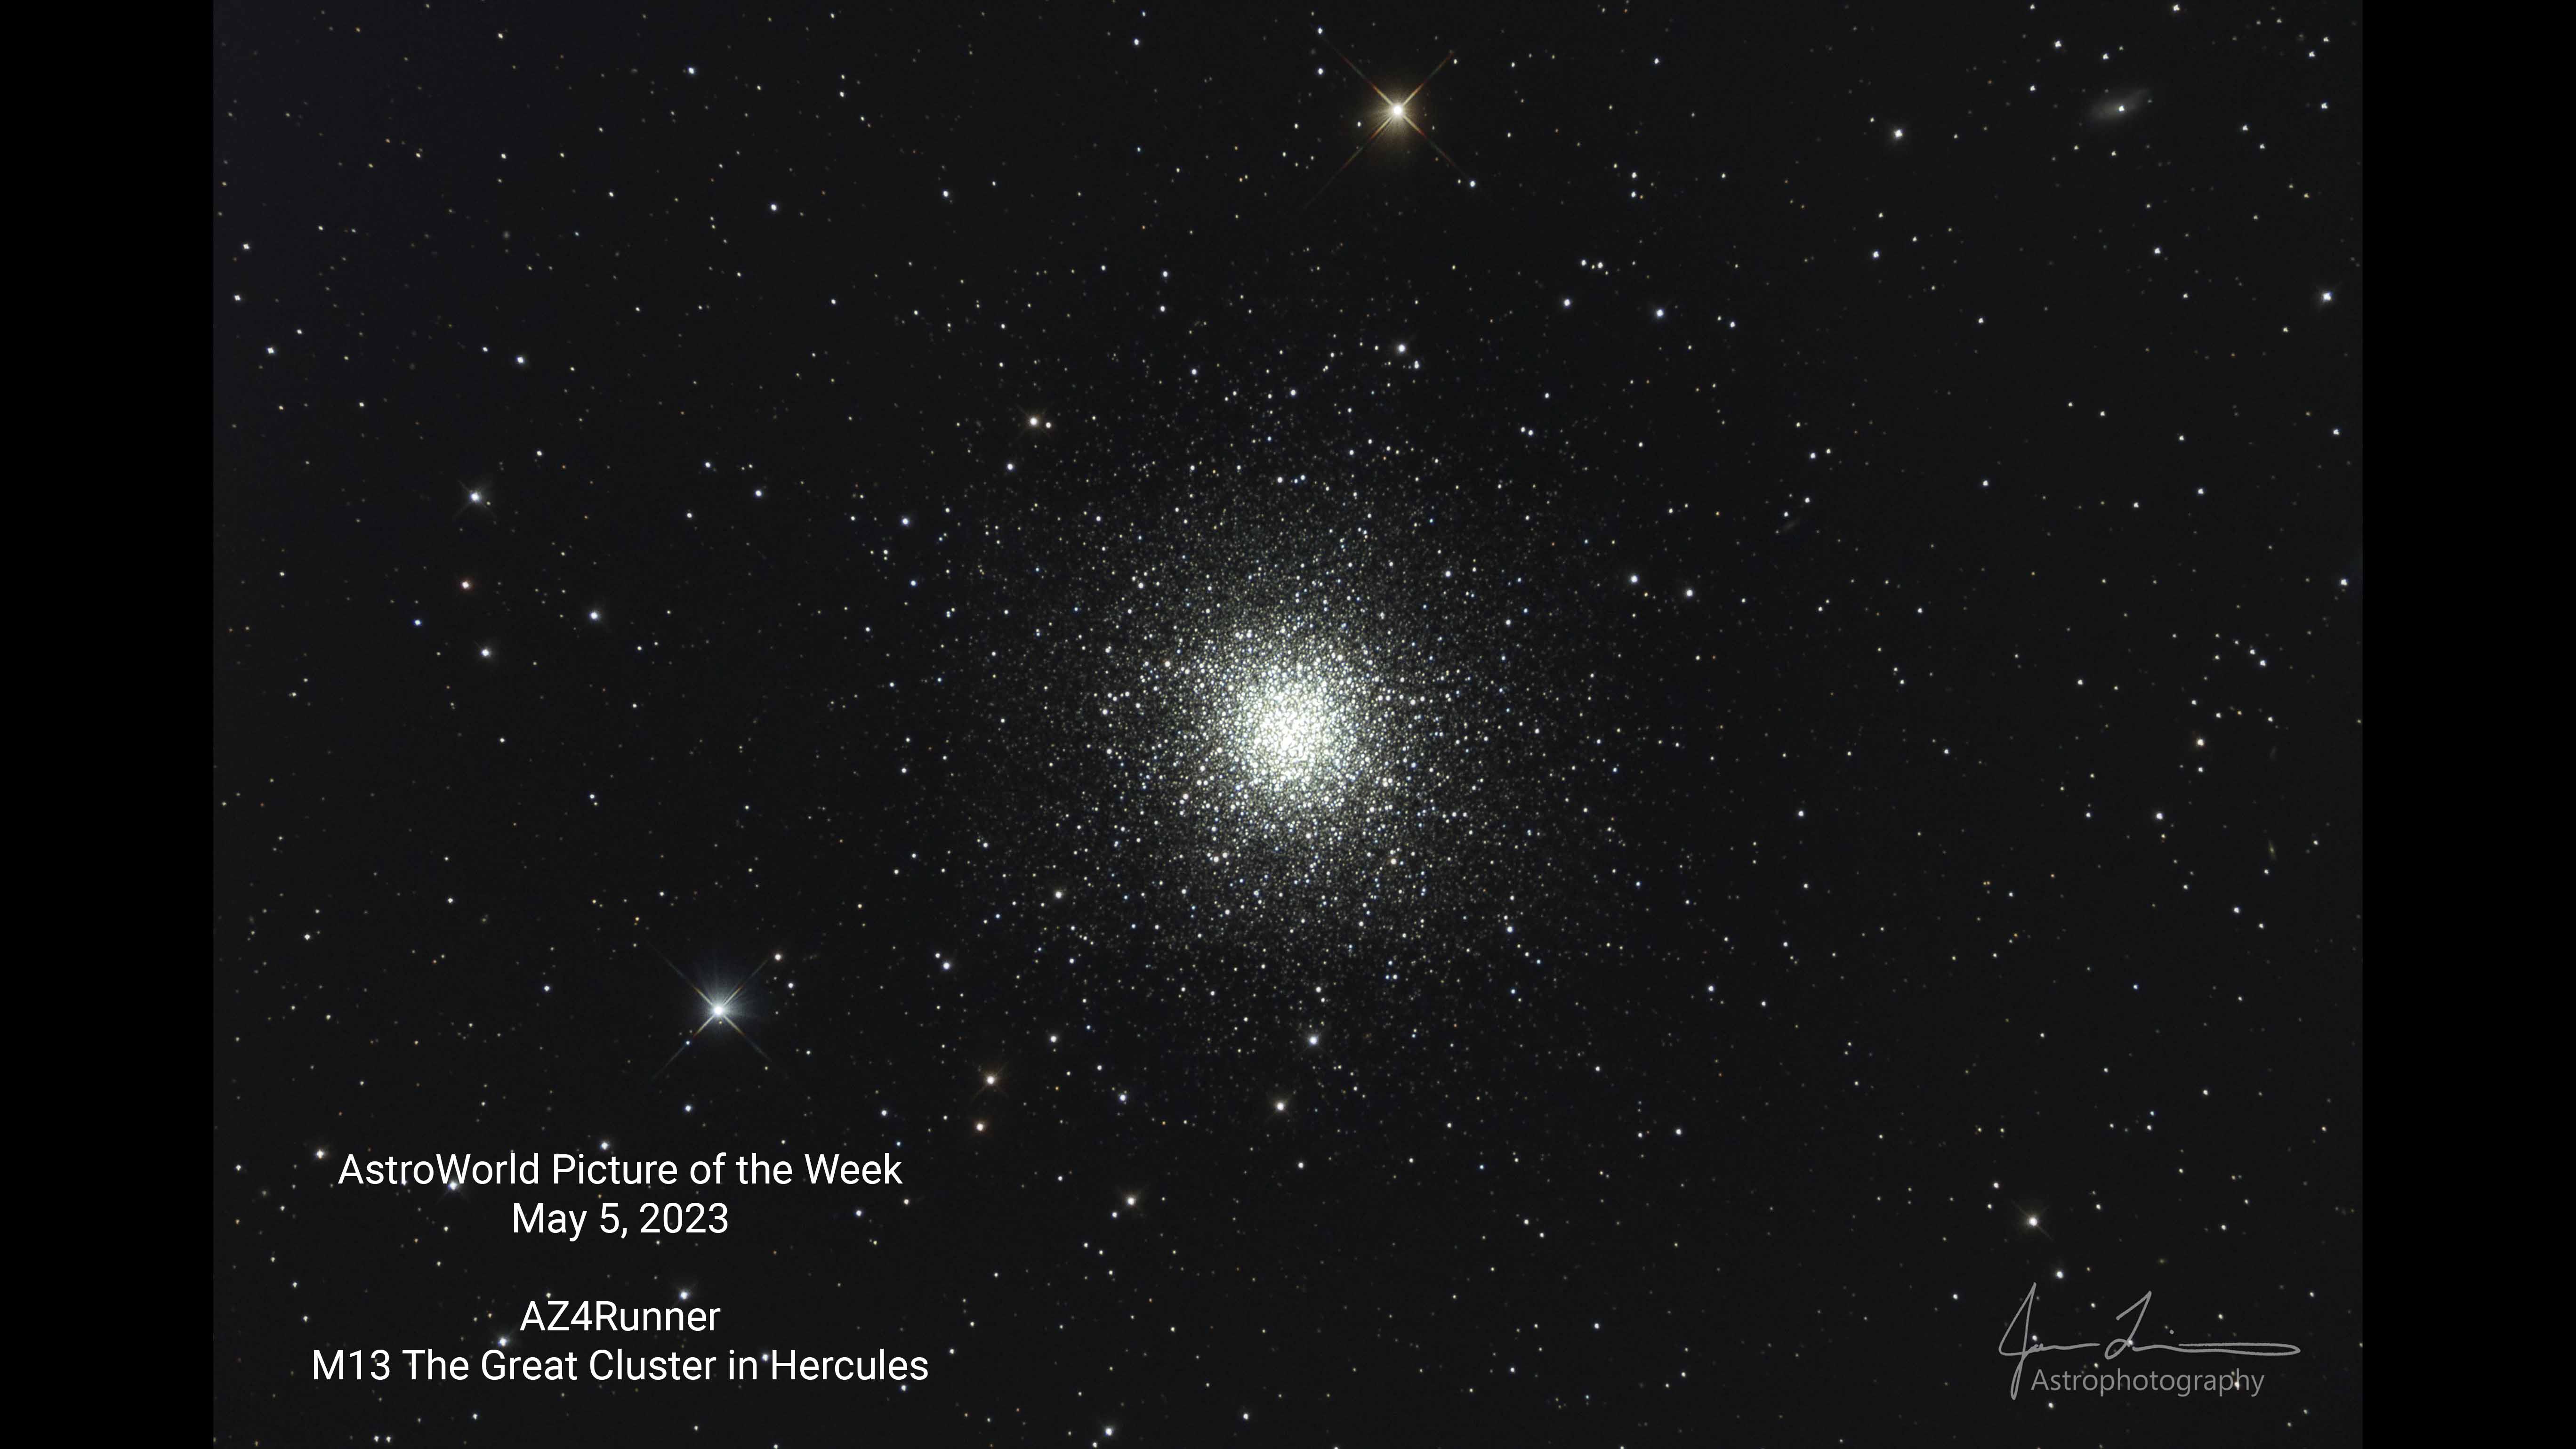 AZ4Runner IOTW submission 05-01-23

M13 - The Hercules Cluster taken on 04-27-23

Main imaging scope
Orion 8"RC with AstroPhysics (x0.72) reducer 1152FL @ f/5.7
ZWO ASI294MM Gain 120 Offset 10
Optolong LRGB 36mm Filters

Guidescope
Orion ST80 400mm FL @ f/5
Orion Starhoot Autoguider

total integration 2hr2min

L - 27min (54x30sec)
R - 41min (82x30sec)
G - 27min (54x30sec)
B - 27min (54x30sec)

Darks,Flats< Dark Flats,BIAS

Imaged from my B6 backyard observatory in Yuma, Arizona
Image Aquisition in APT
Stacked in DSS
Processed in Photoshop